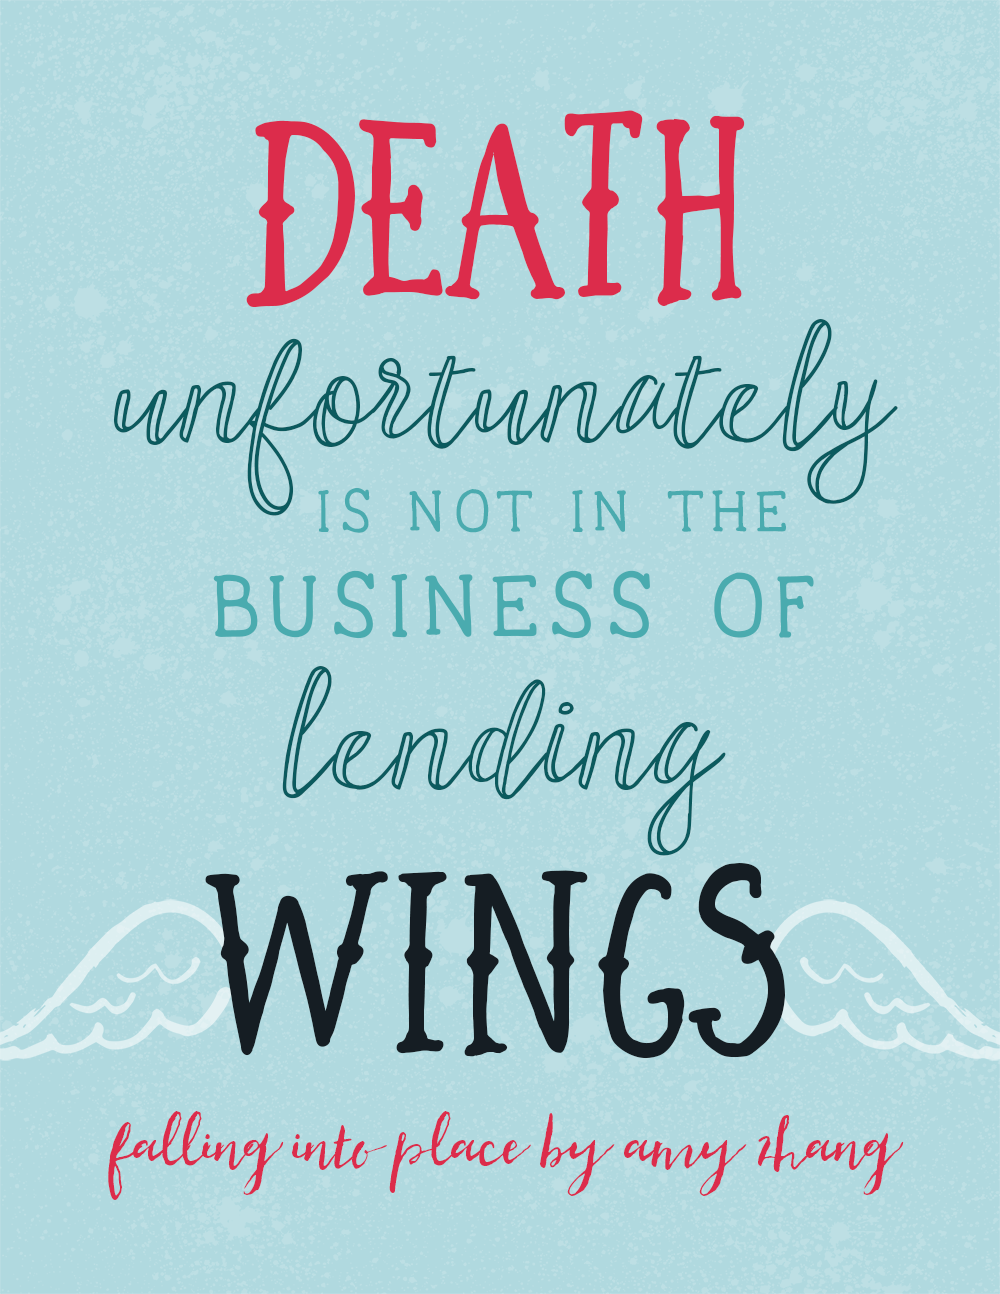 Falling Into Place quote - Death unfortunately is not in the business of lending wings